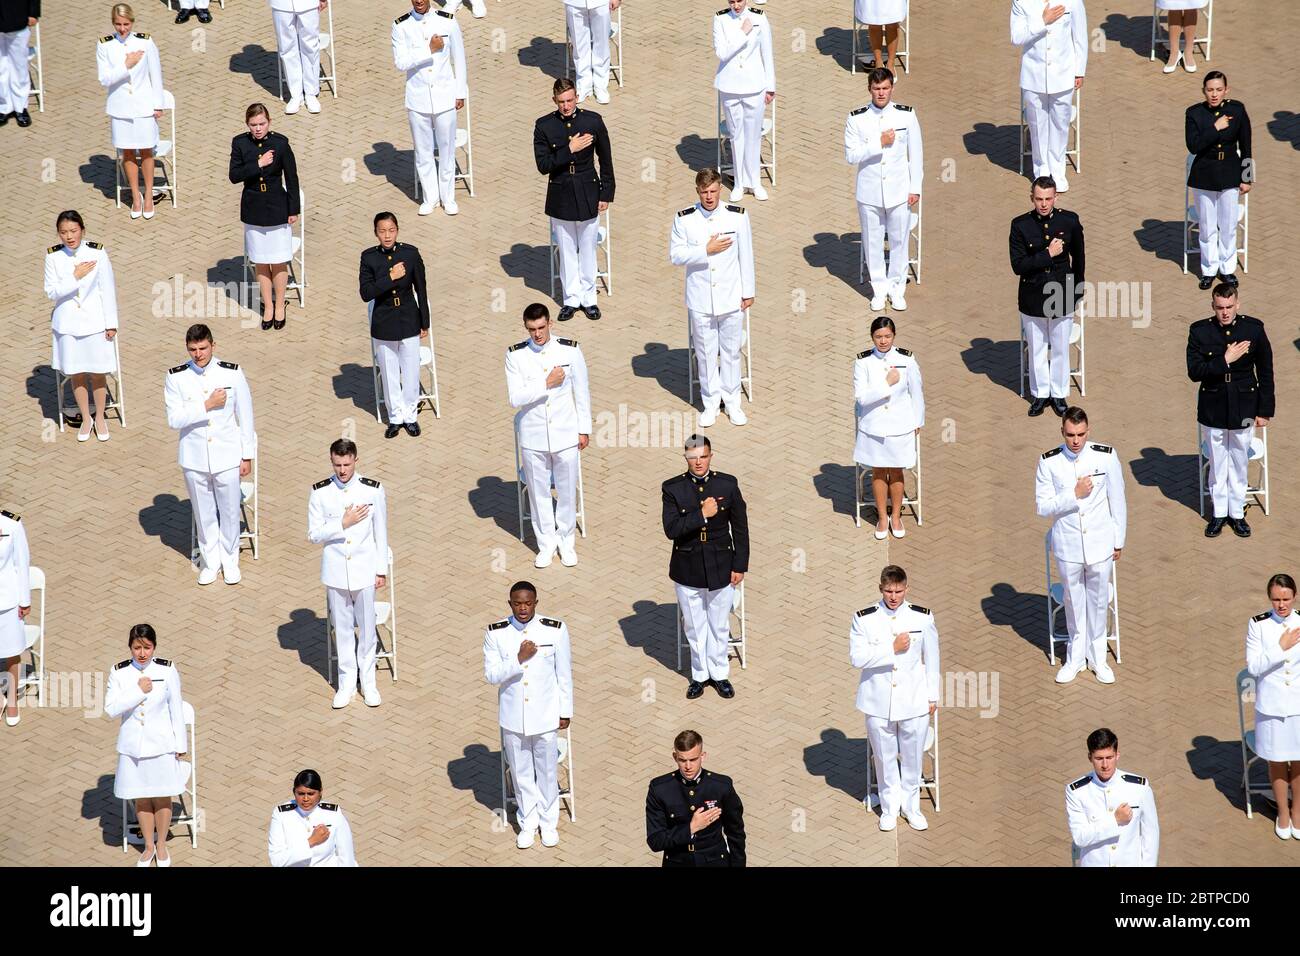 U.S. Naval Academy midshipmen during the commencement and commissioning ceremony for the Naval Academy Class of 2020 under COVID-19, coronavirus pandemic social distancing rules May 14, 2020 in Annapolis, Maryland. Approximately 1,000 midshipmen will graduate and be sworn-in during five events and one virtual ceremony. Stock Photo